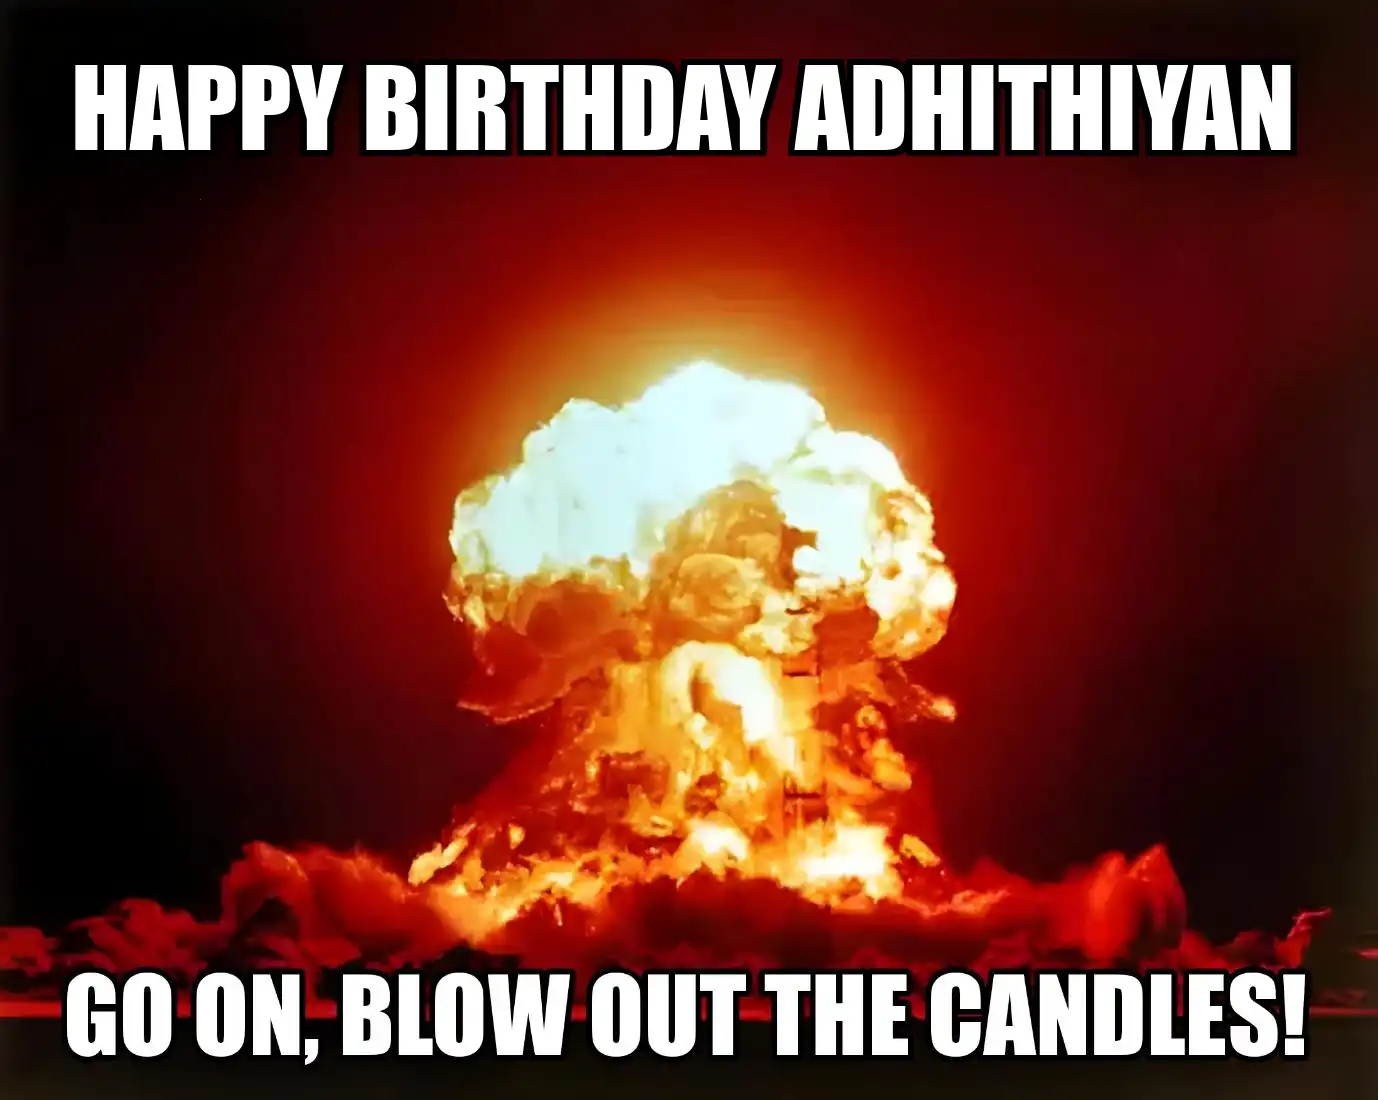 Happy Birthday Adhithiyan Go On Blow Out The Candles Meme